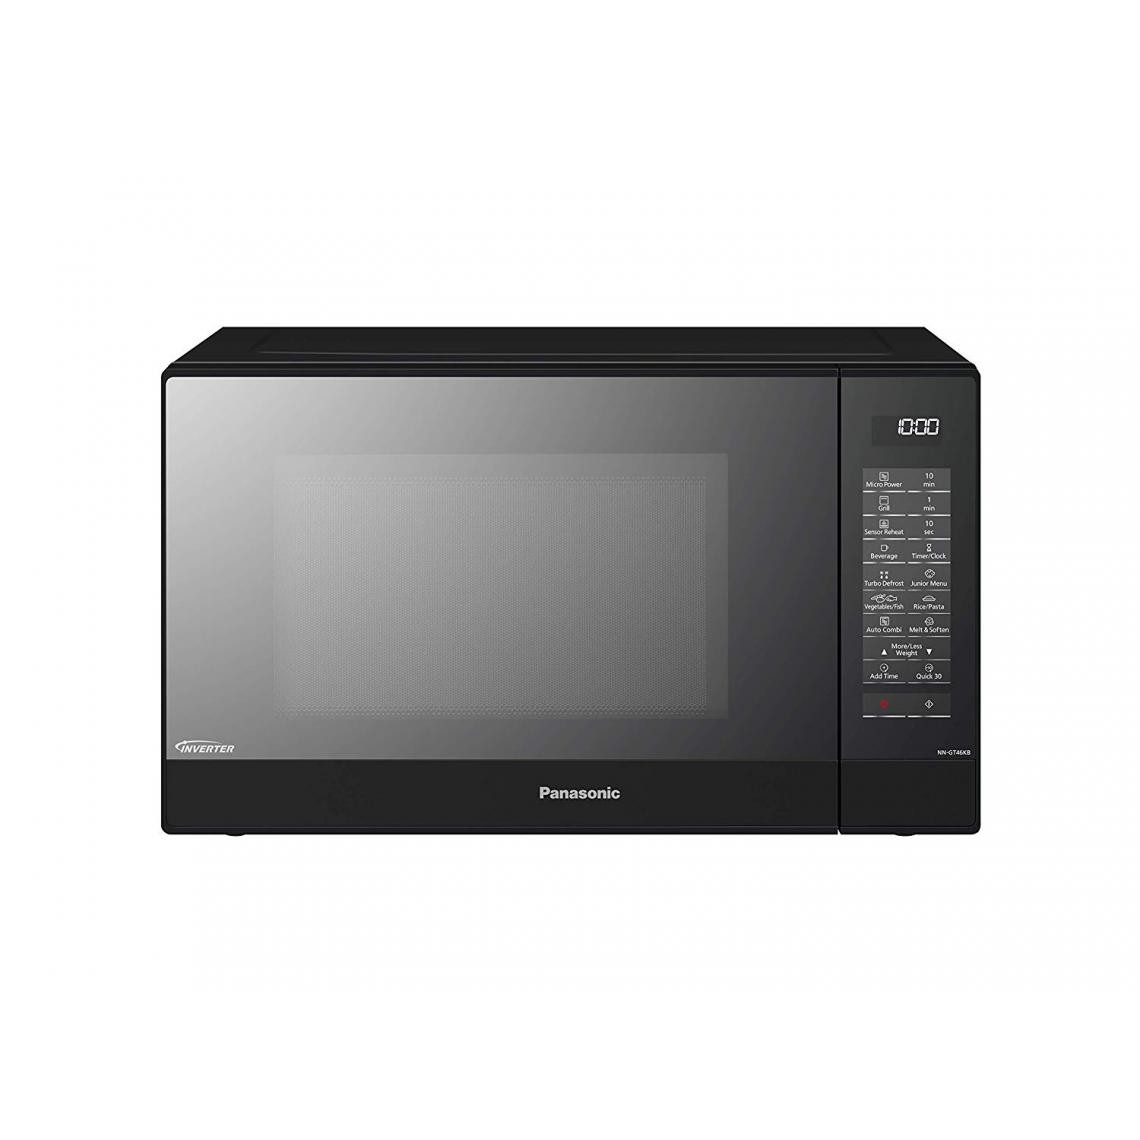 Panasonic - Rasage Electrique - Micro ondes Grill Encastrable NN-GT46KBSUG - Four micro-ondes